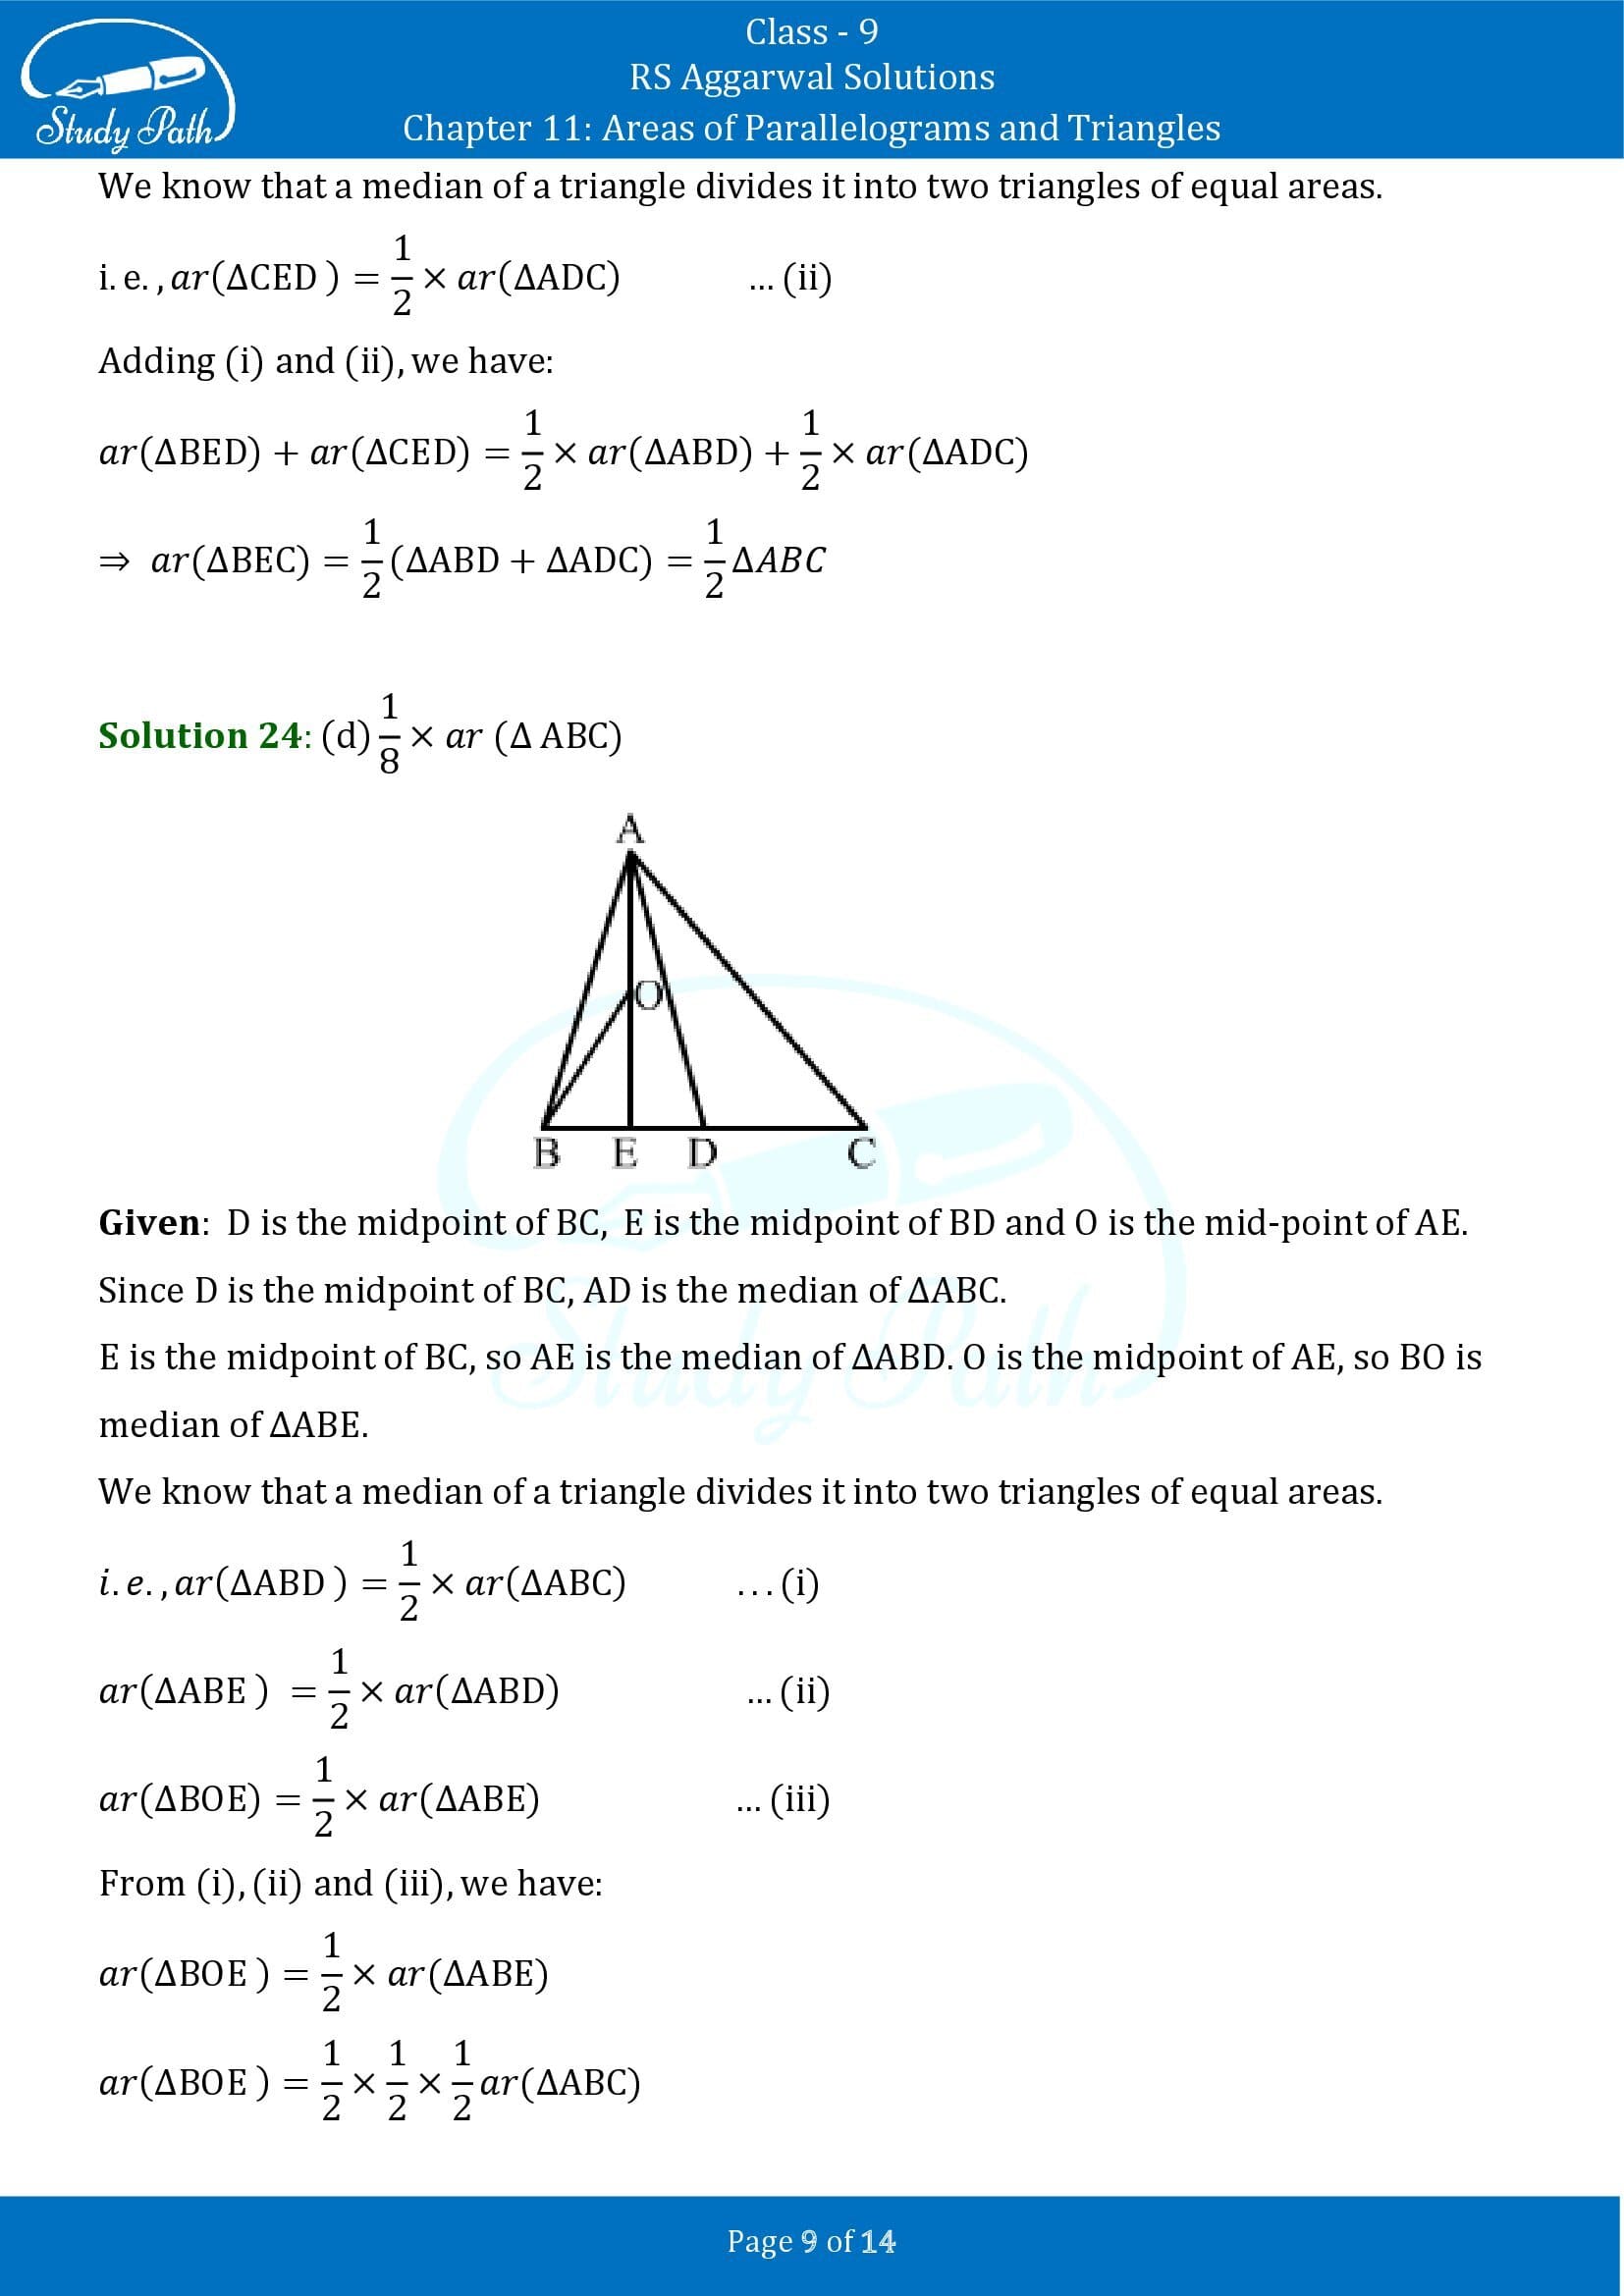 RS Aggarwal Solutions Class 9 Chapter 11 Areas of Parallelograms and Triangles Multiple Choice Questions MCQs 00009